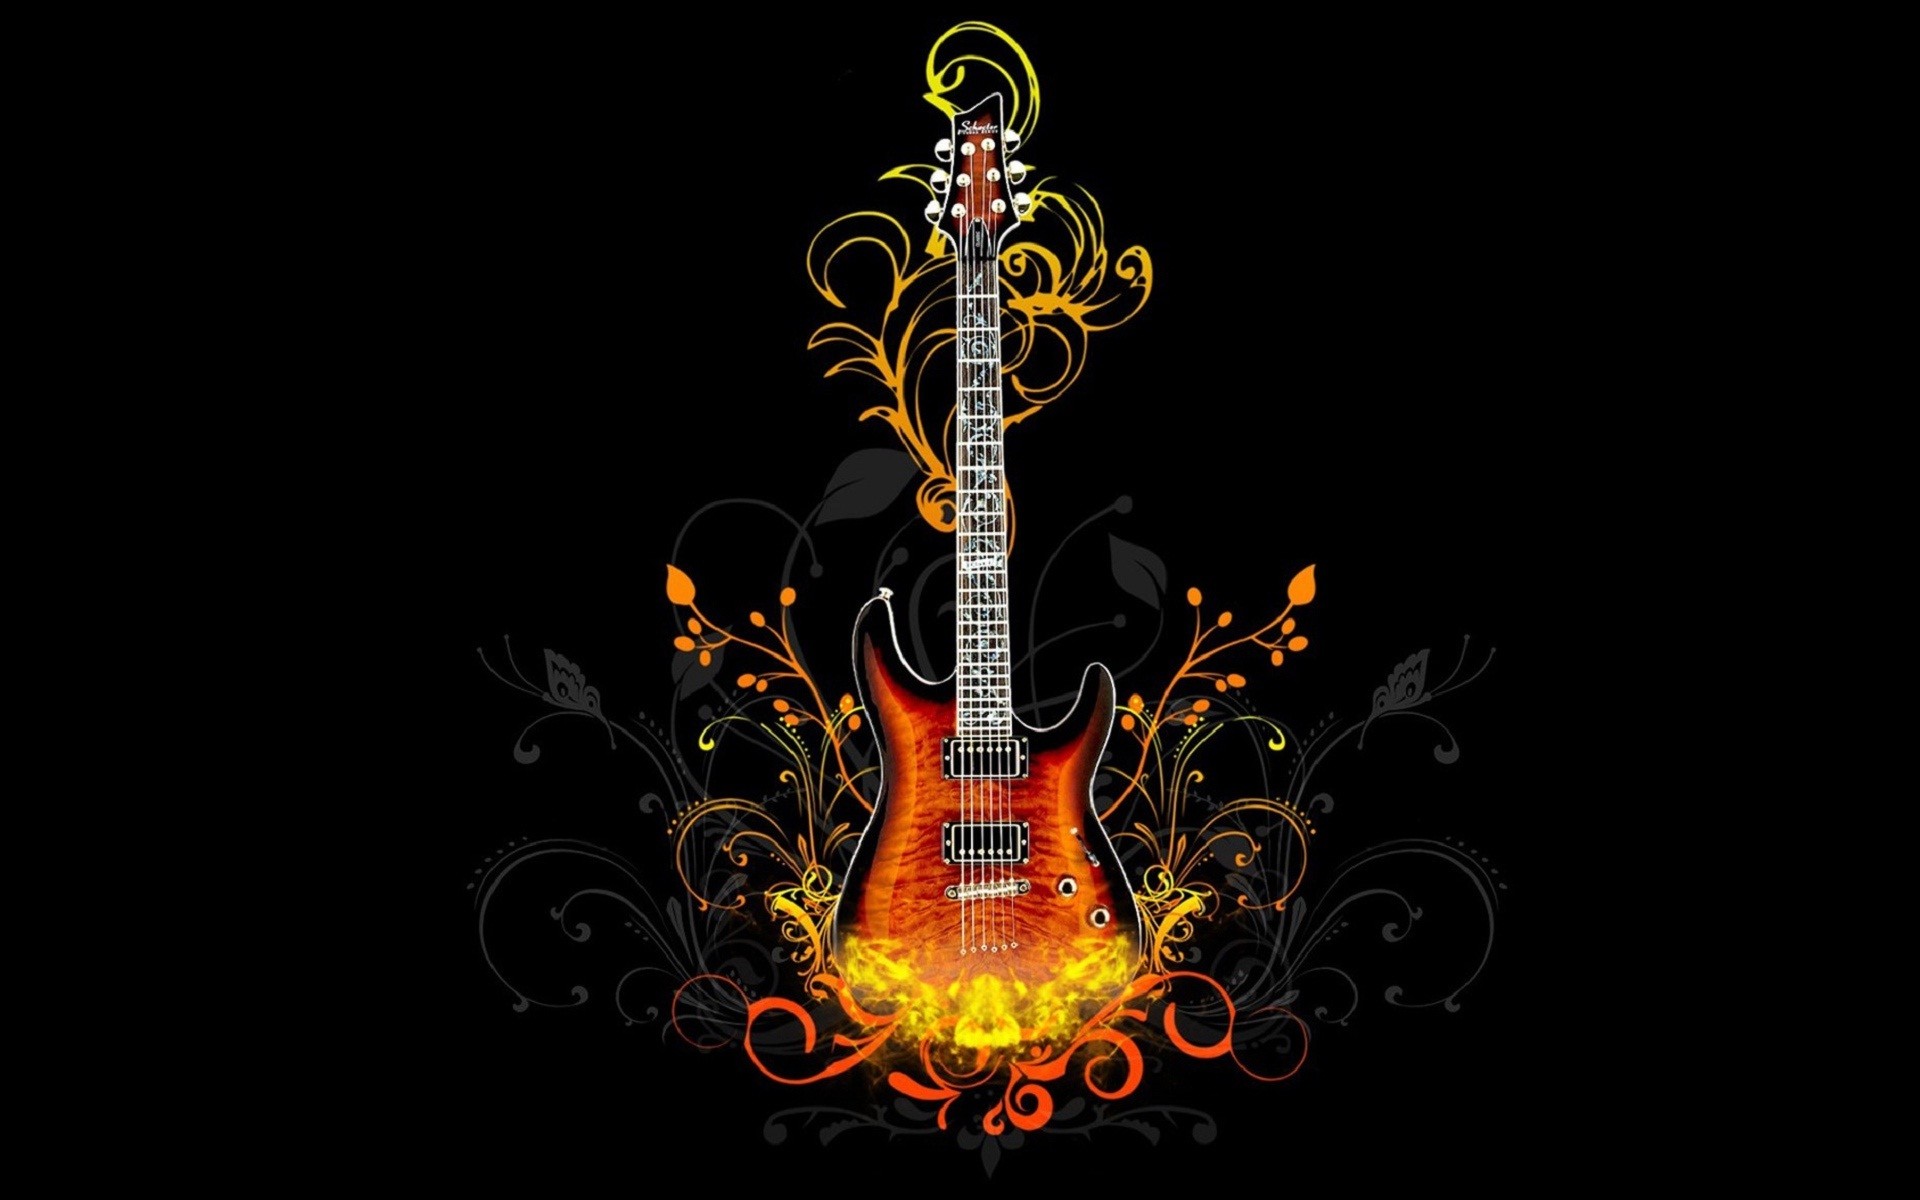 1920x1200 in Flames wallpaper from Skulls wallpapers Flaming Skull With Guitar  Wallpaper Hd ...